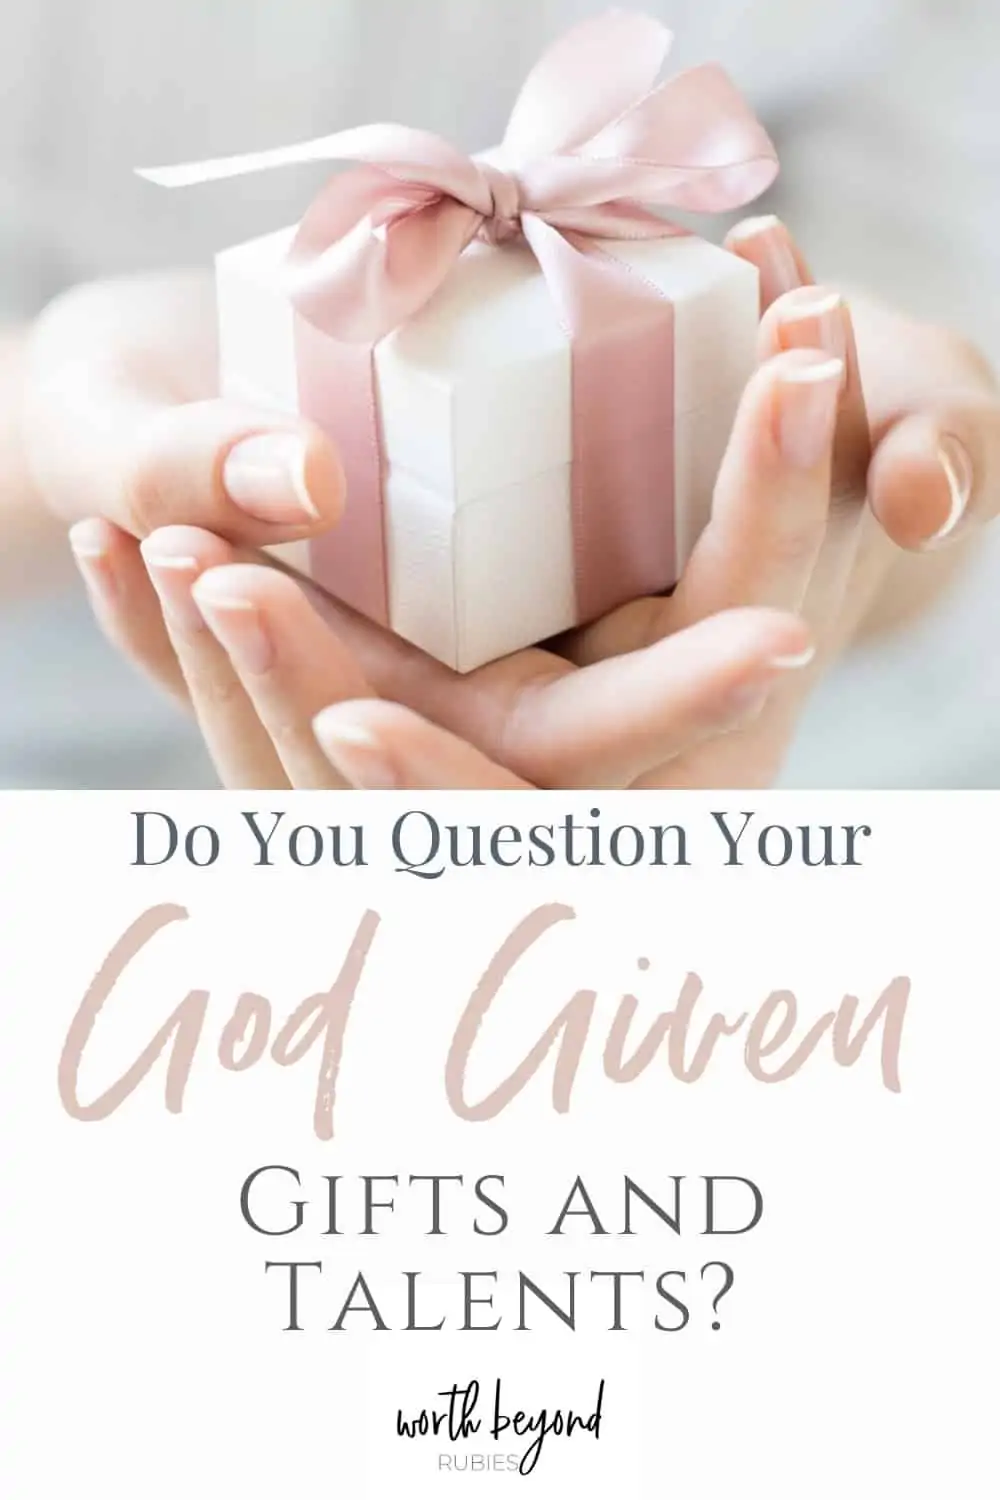 an image of a woman's hands holding a white gift box wrapped in pink ribbon and text that says Do You Question Your God Given Gifts and Talents?